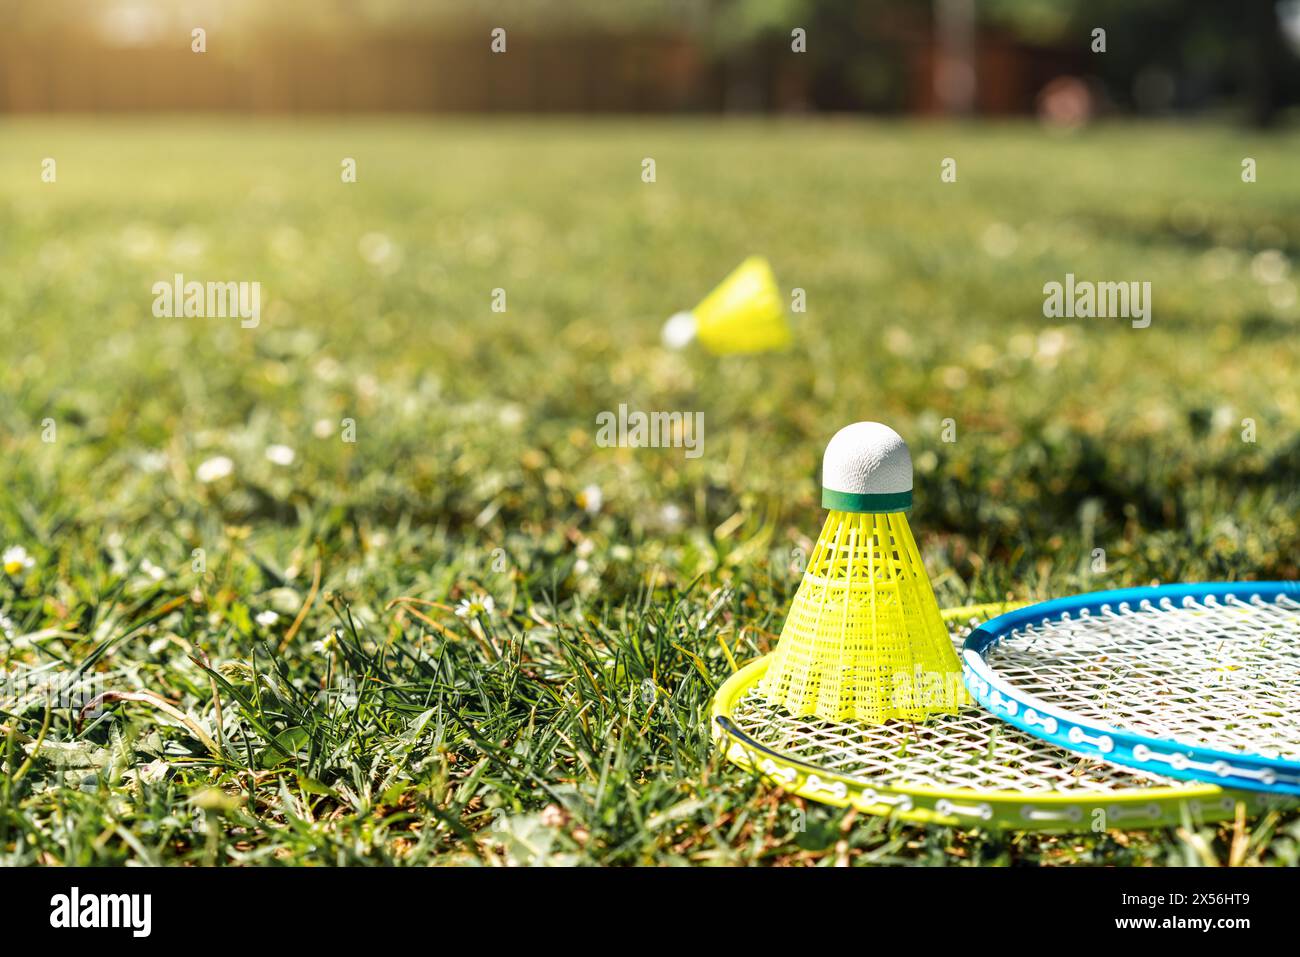 Two badminton rackets and shuttlecock on the green grass. Summer sports activity. Stock Photo